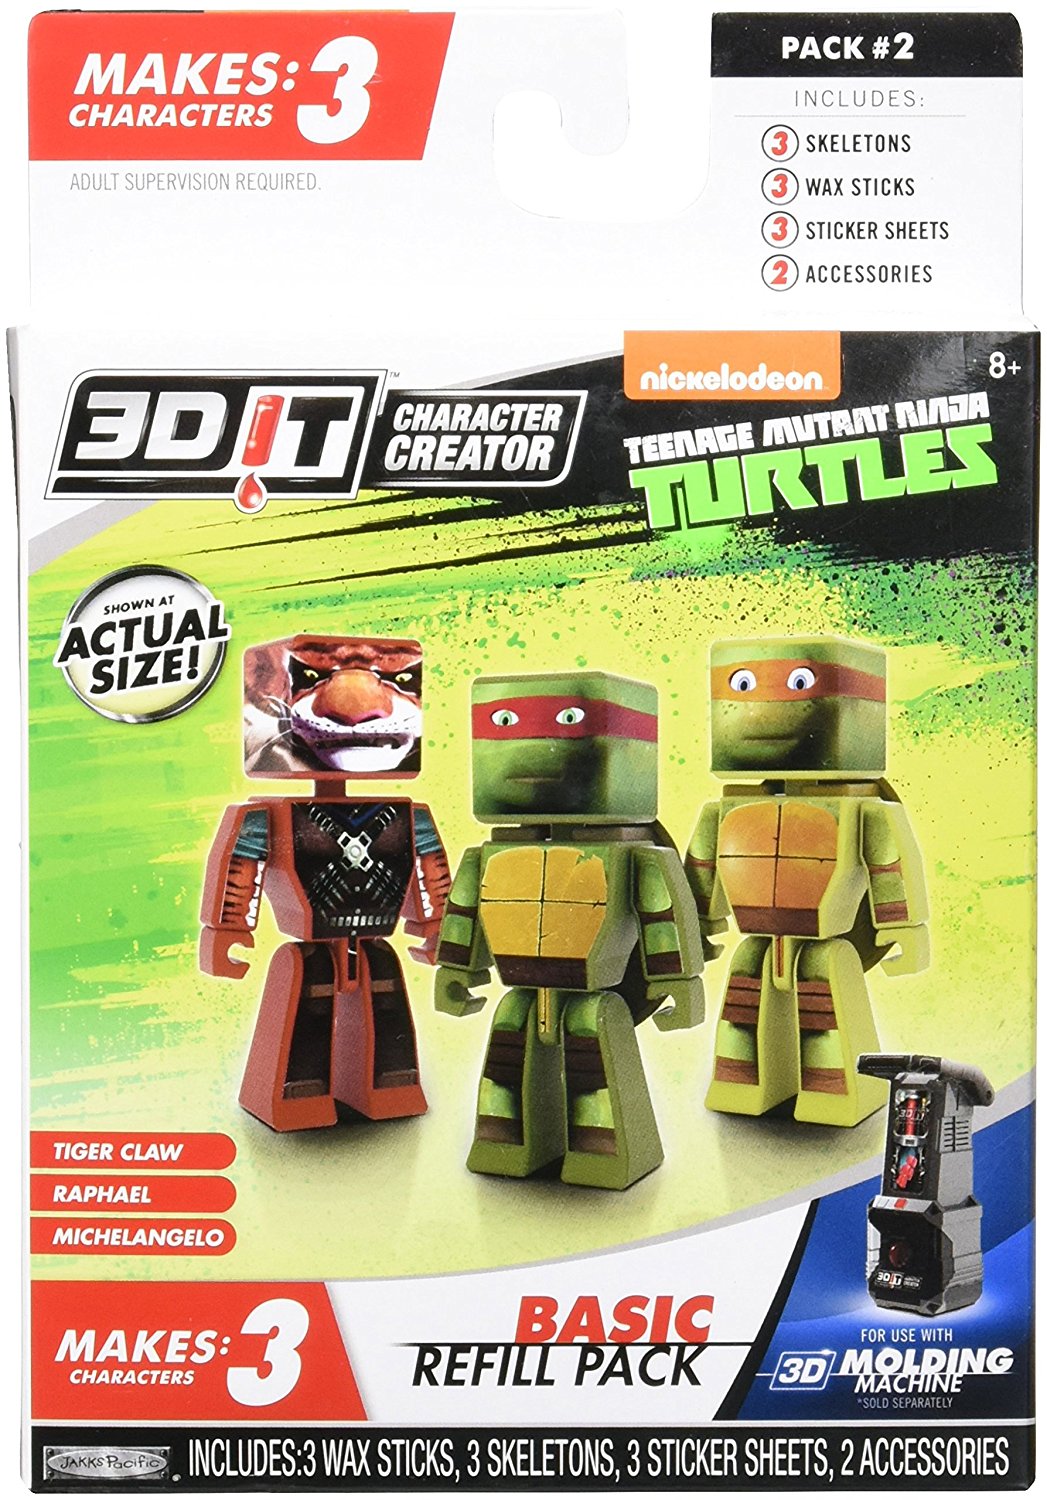 3DIT Character Creator TMNT Basic Refill Pack #2 - Click Image to Close